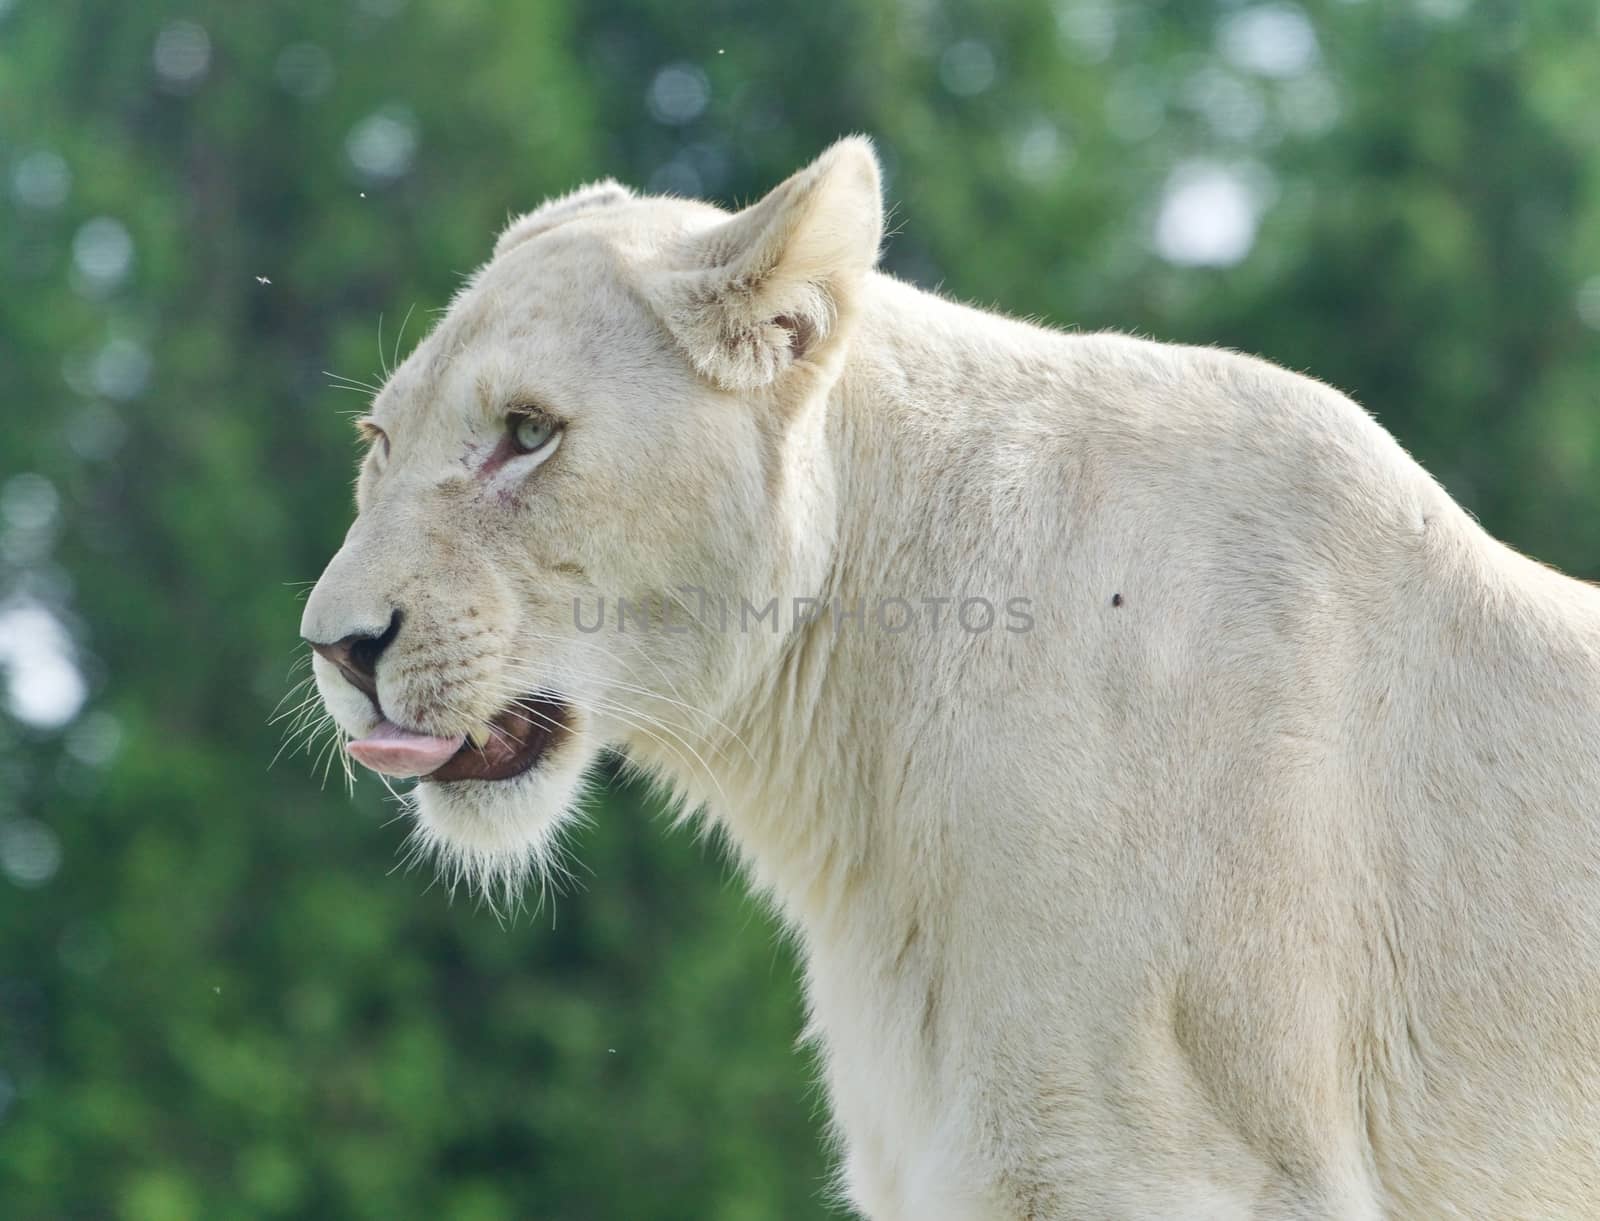 Isolated image of a scary white lion screaming by teo